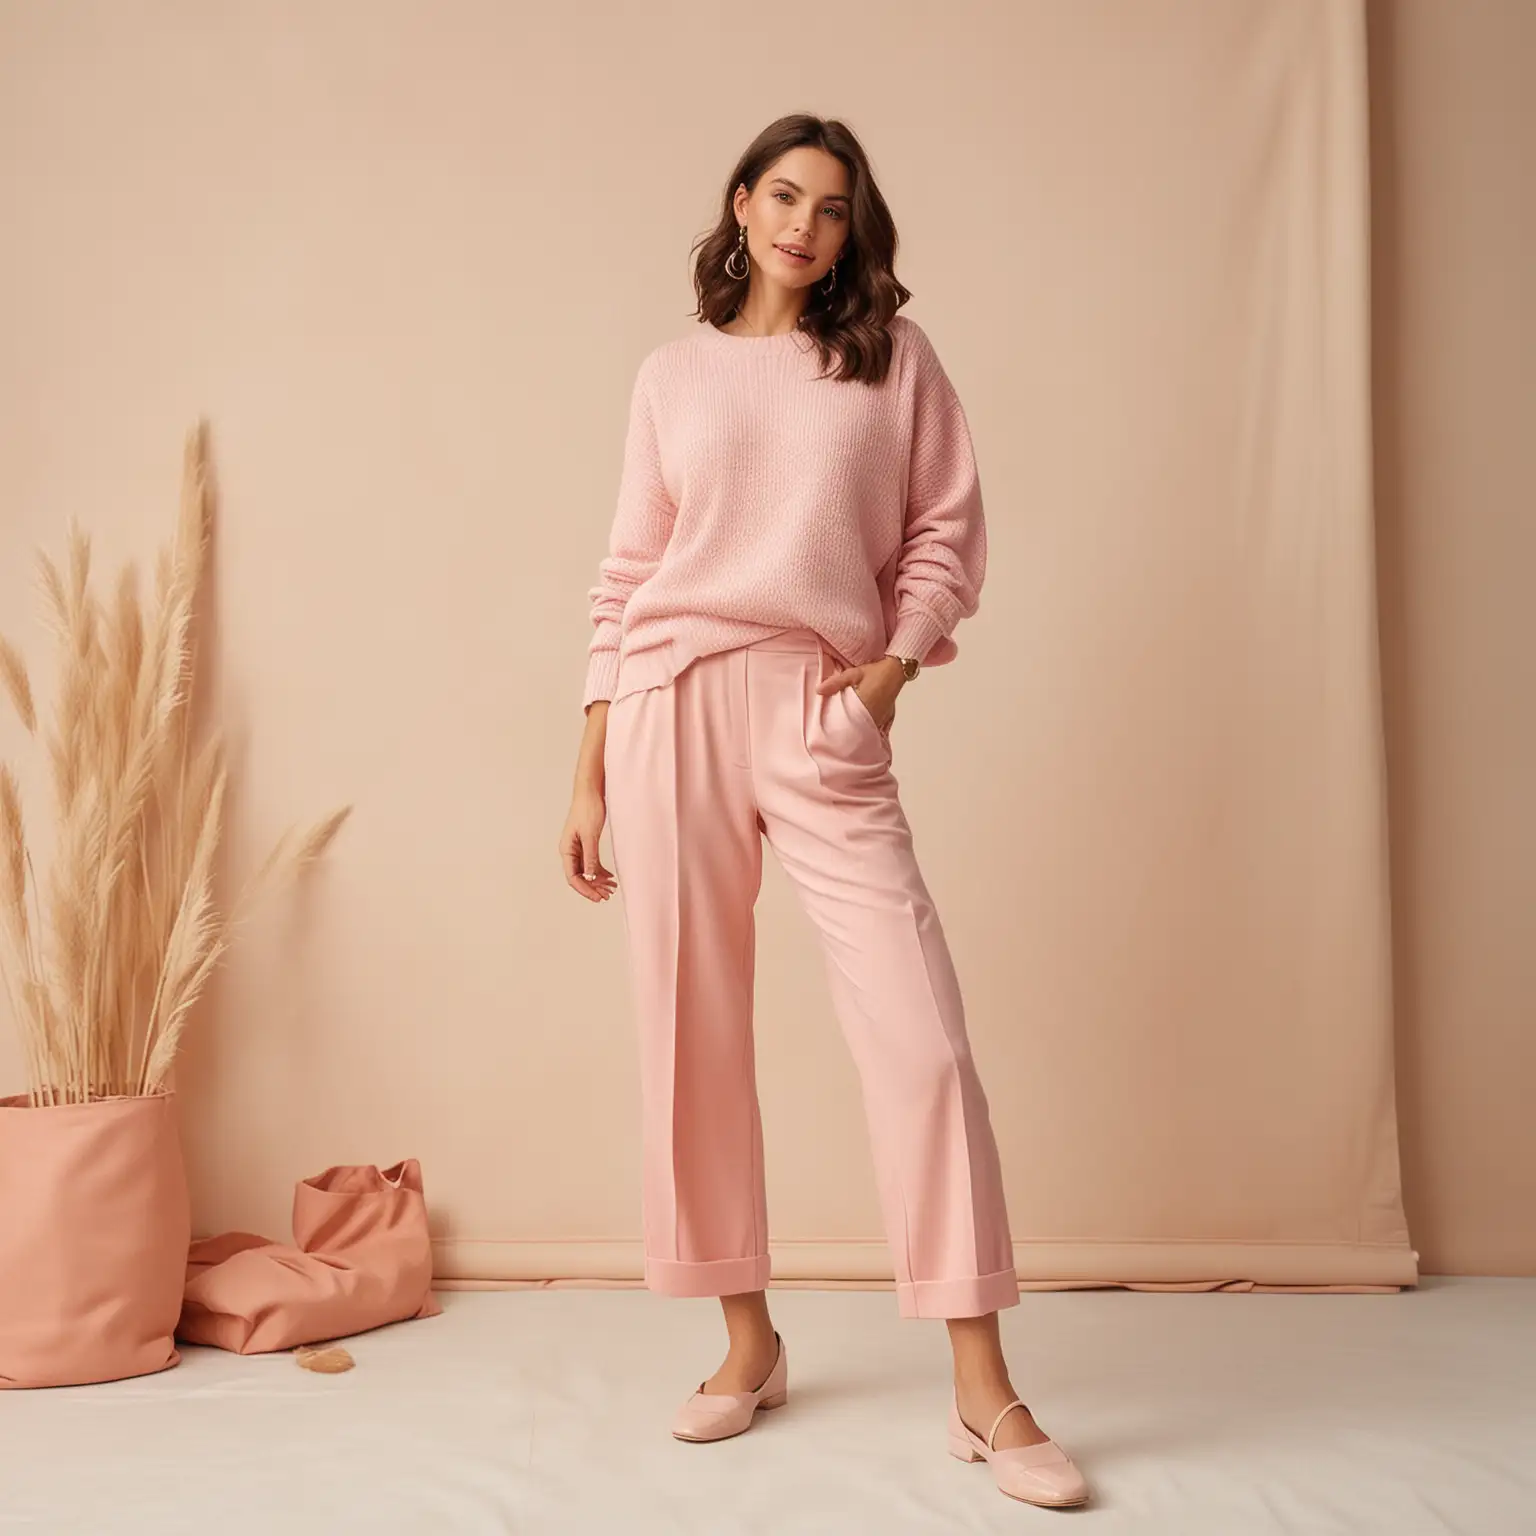 Stylish Woman in Pink Sweater and VanillaColored Pants with Square Background